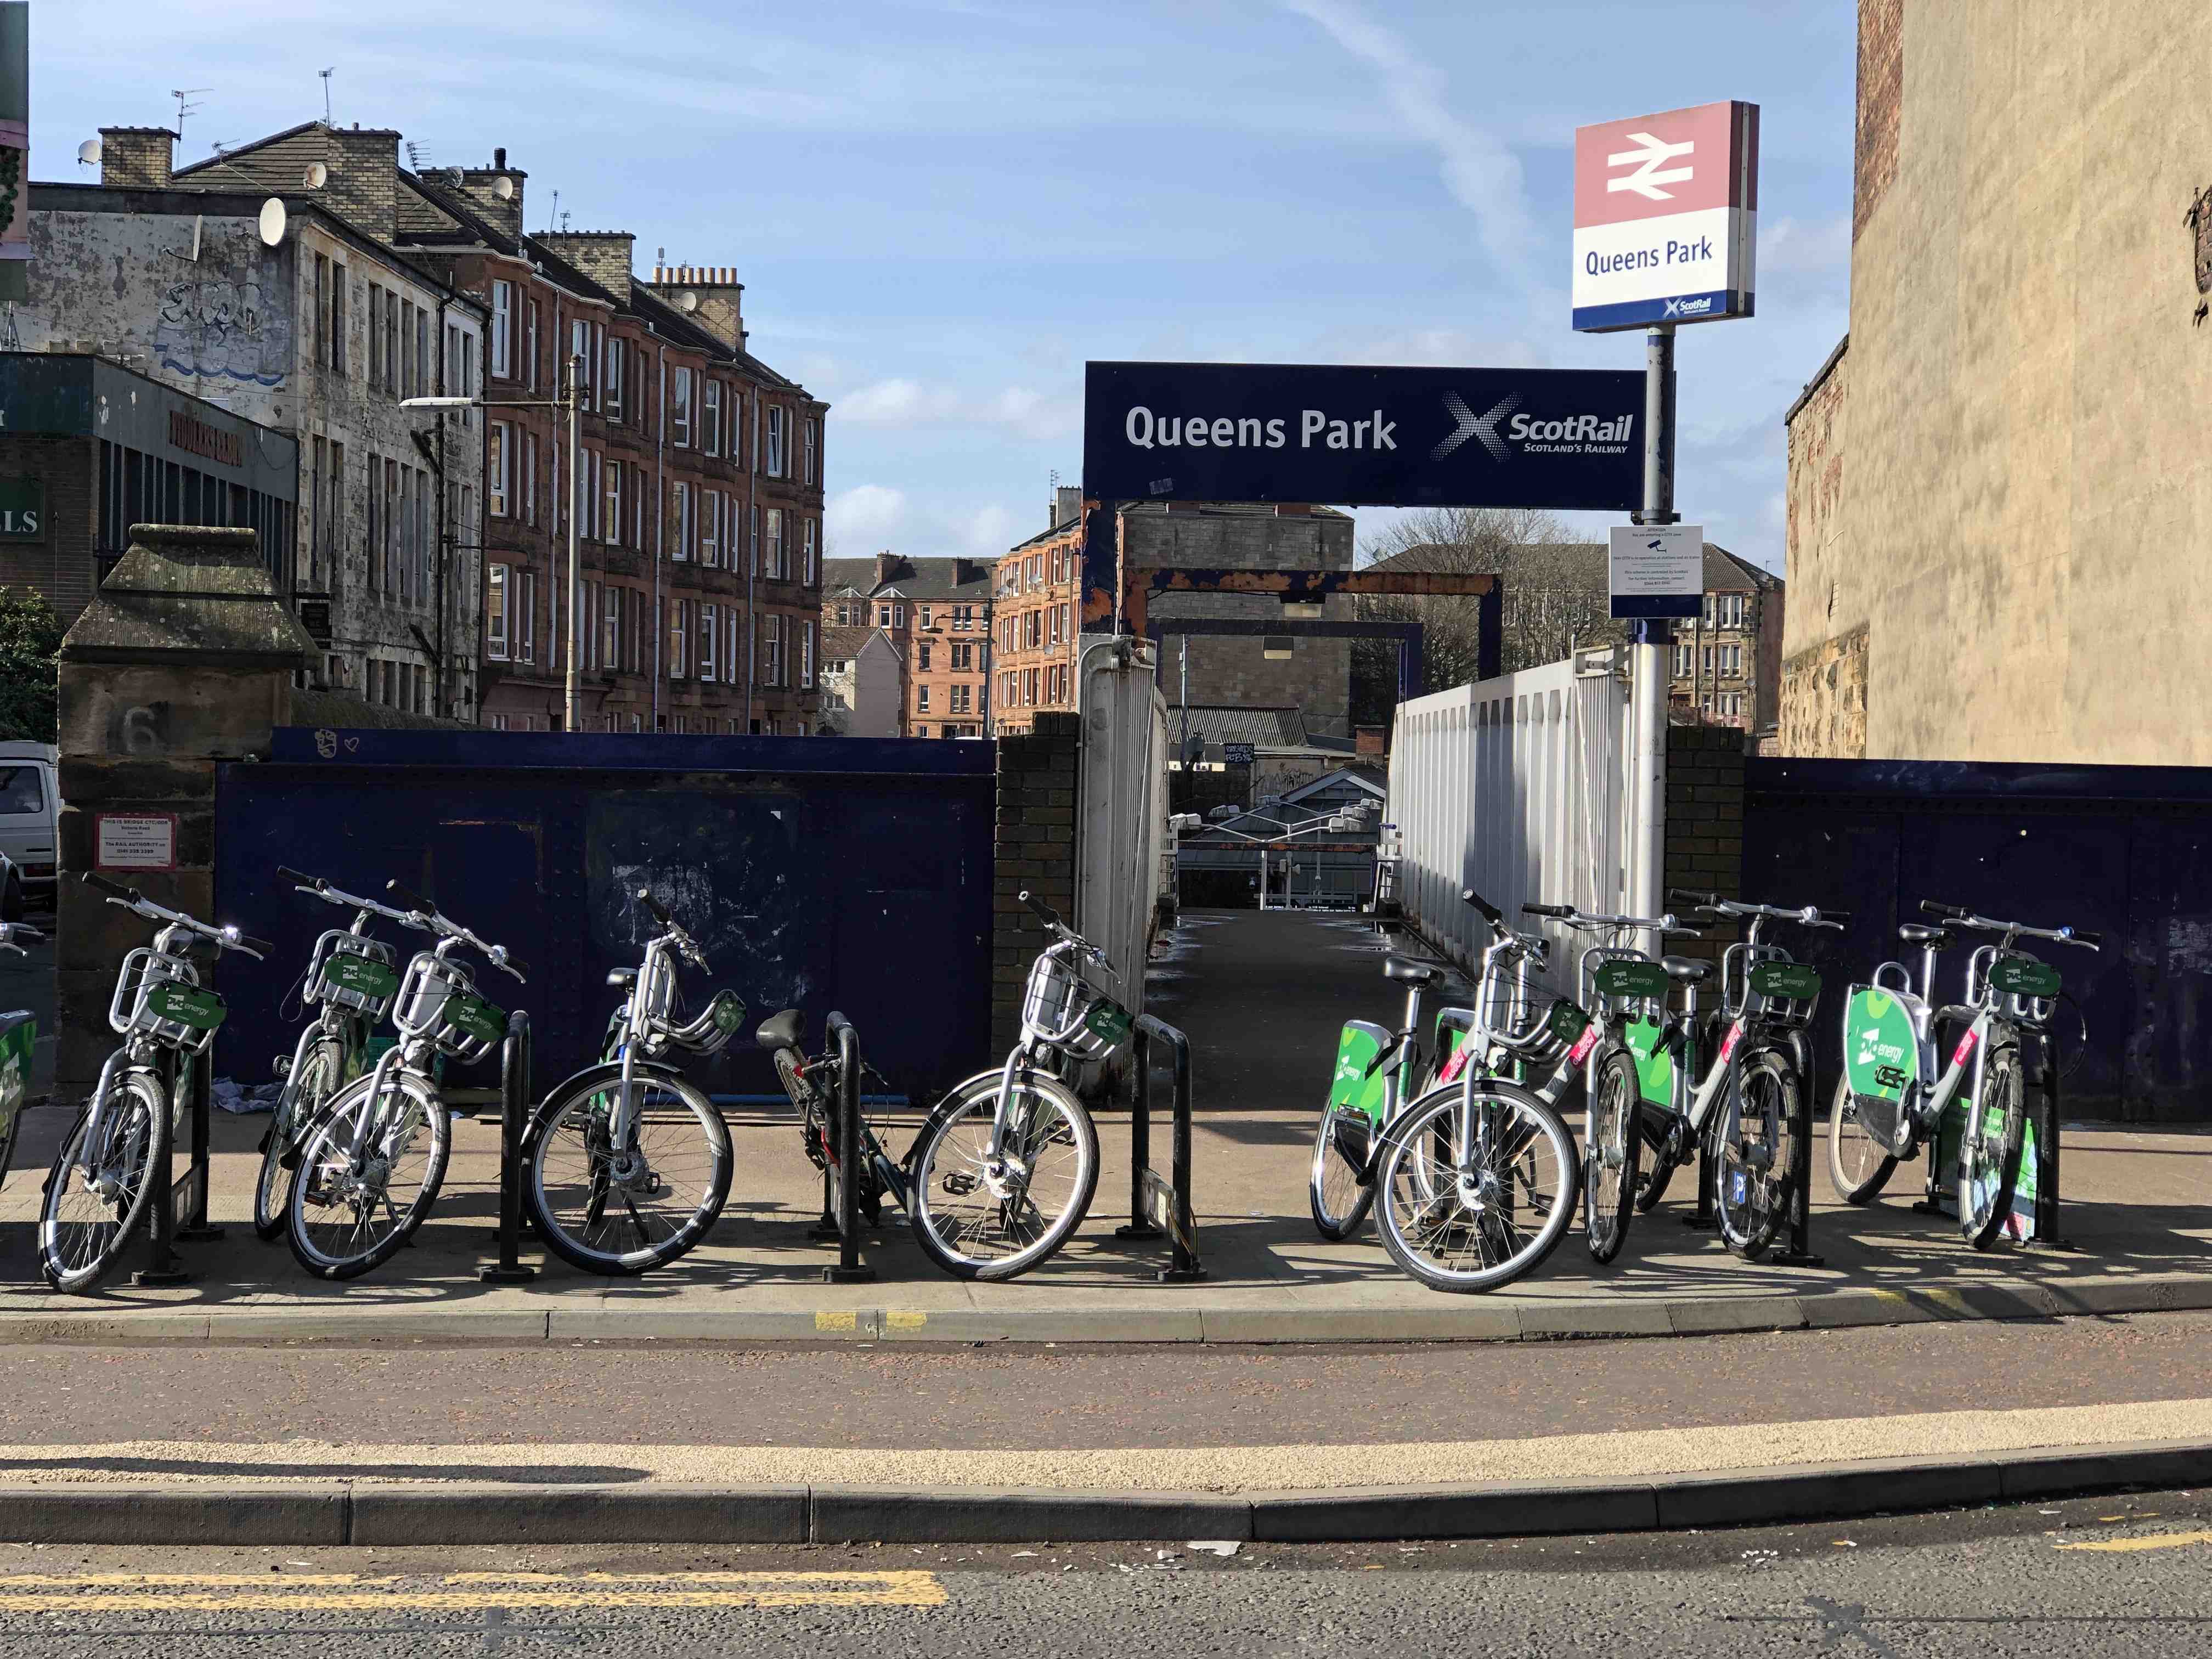 The entrance to Queens Park train station in Glasgow. About seven bicycles are parked in a row.